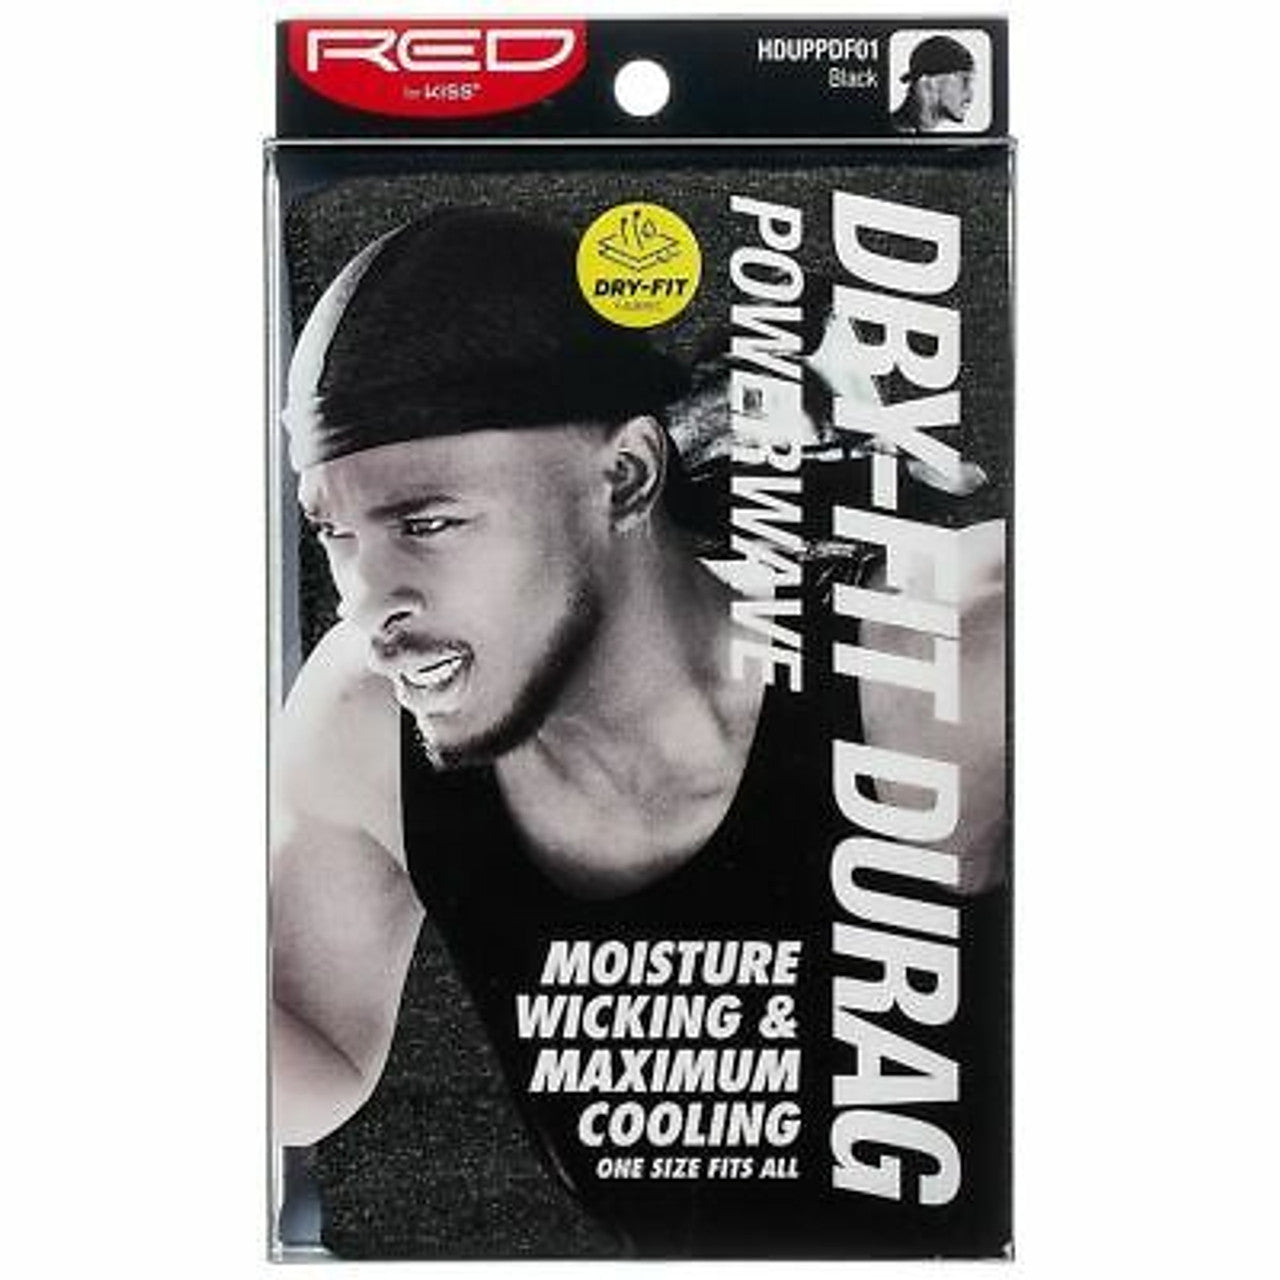 Red by Kiss Power Wave Dry Fit Durag - Black - #HDUPPDF01